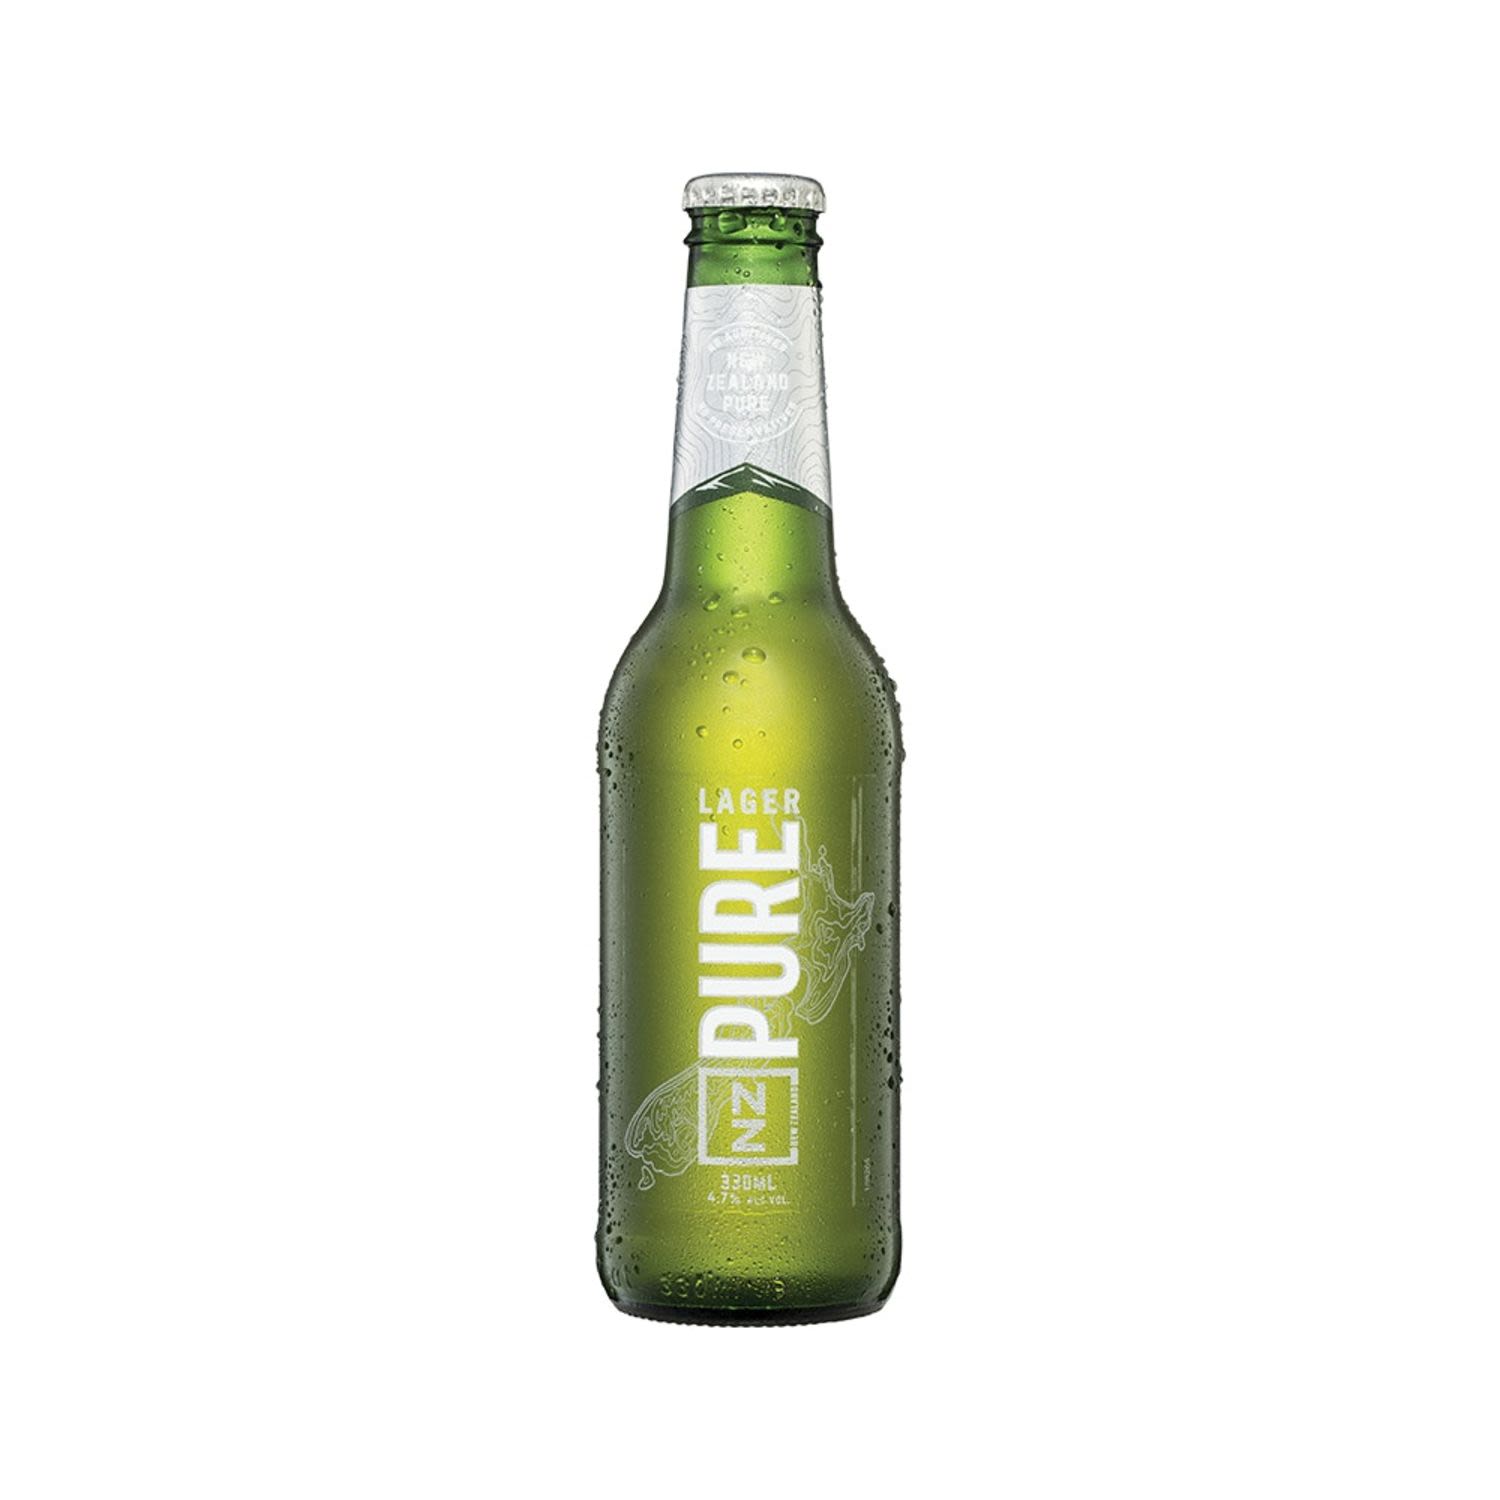 NZ Pure Lager Bottle 330mL